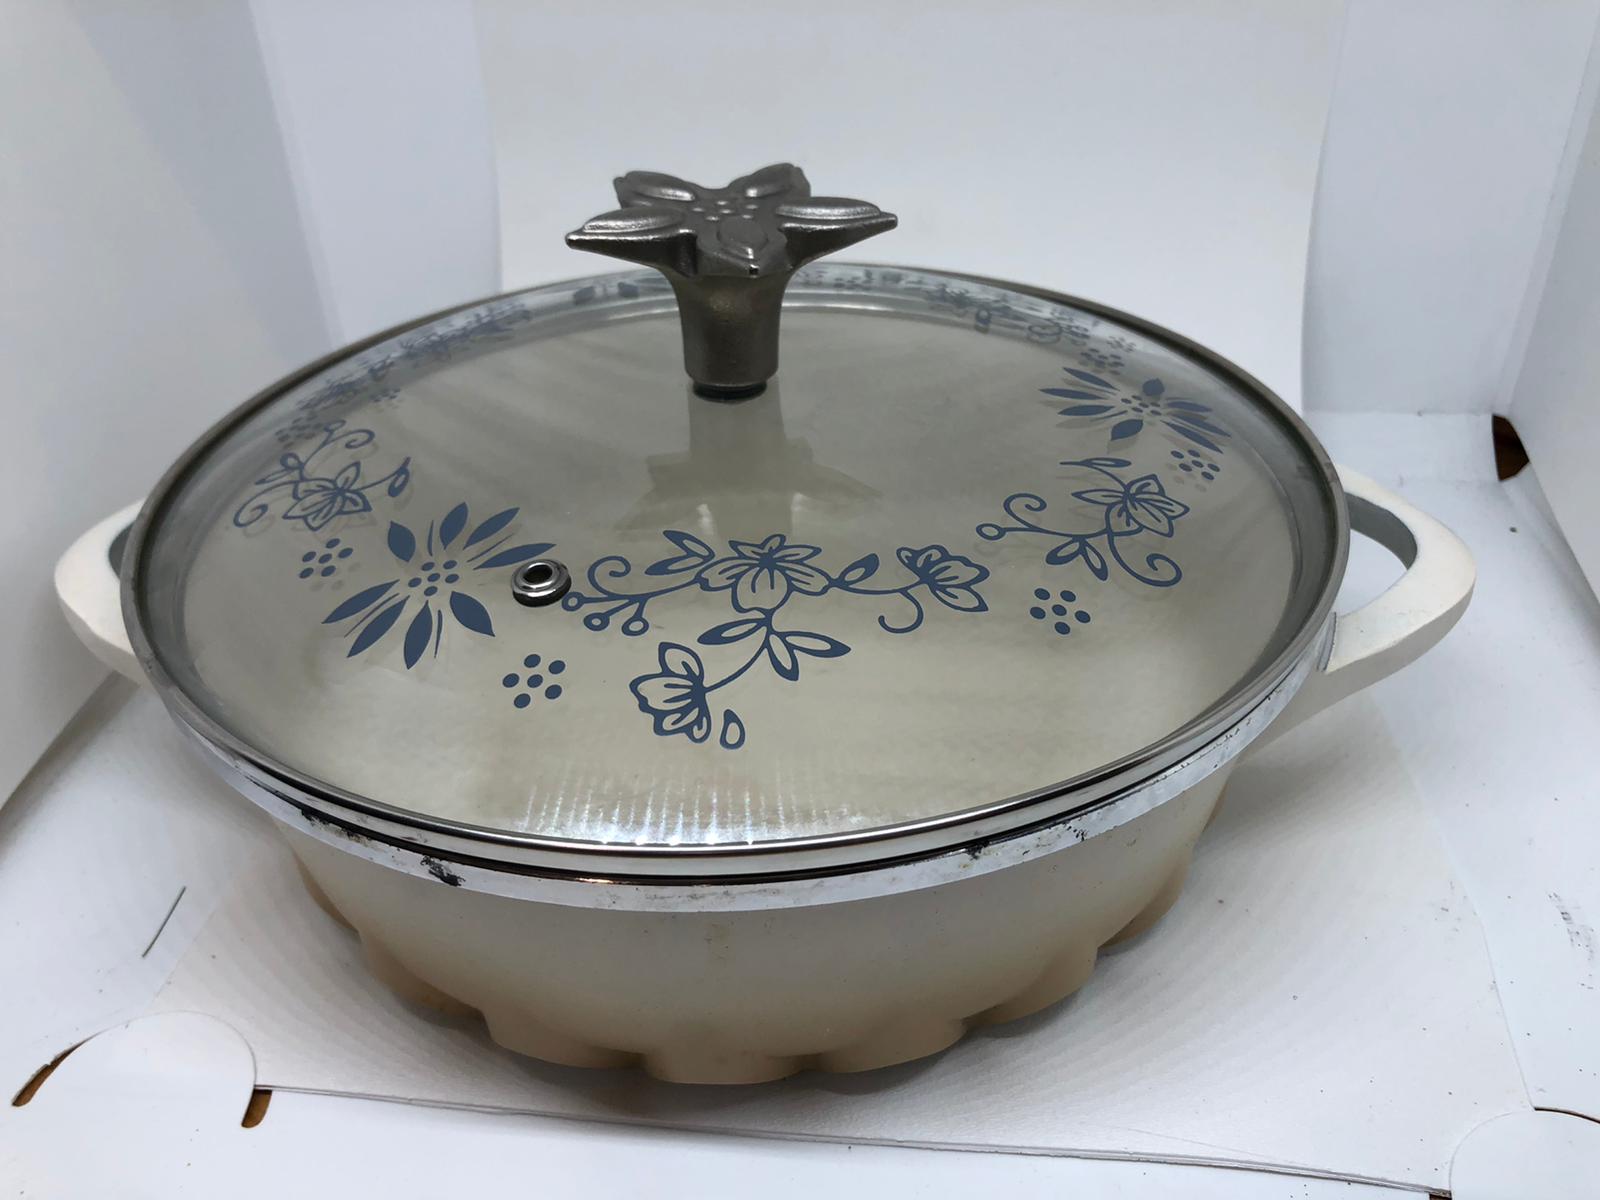 "As is" Temp-tations Figural Bottom 2.6-qt Covered Casserole with Tool